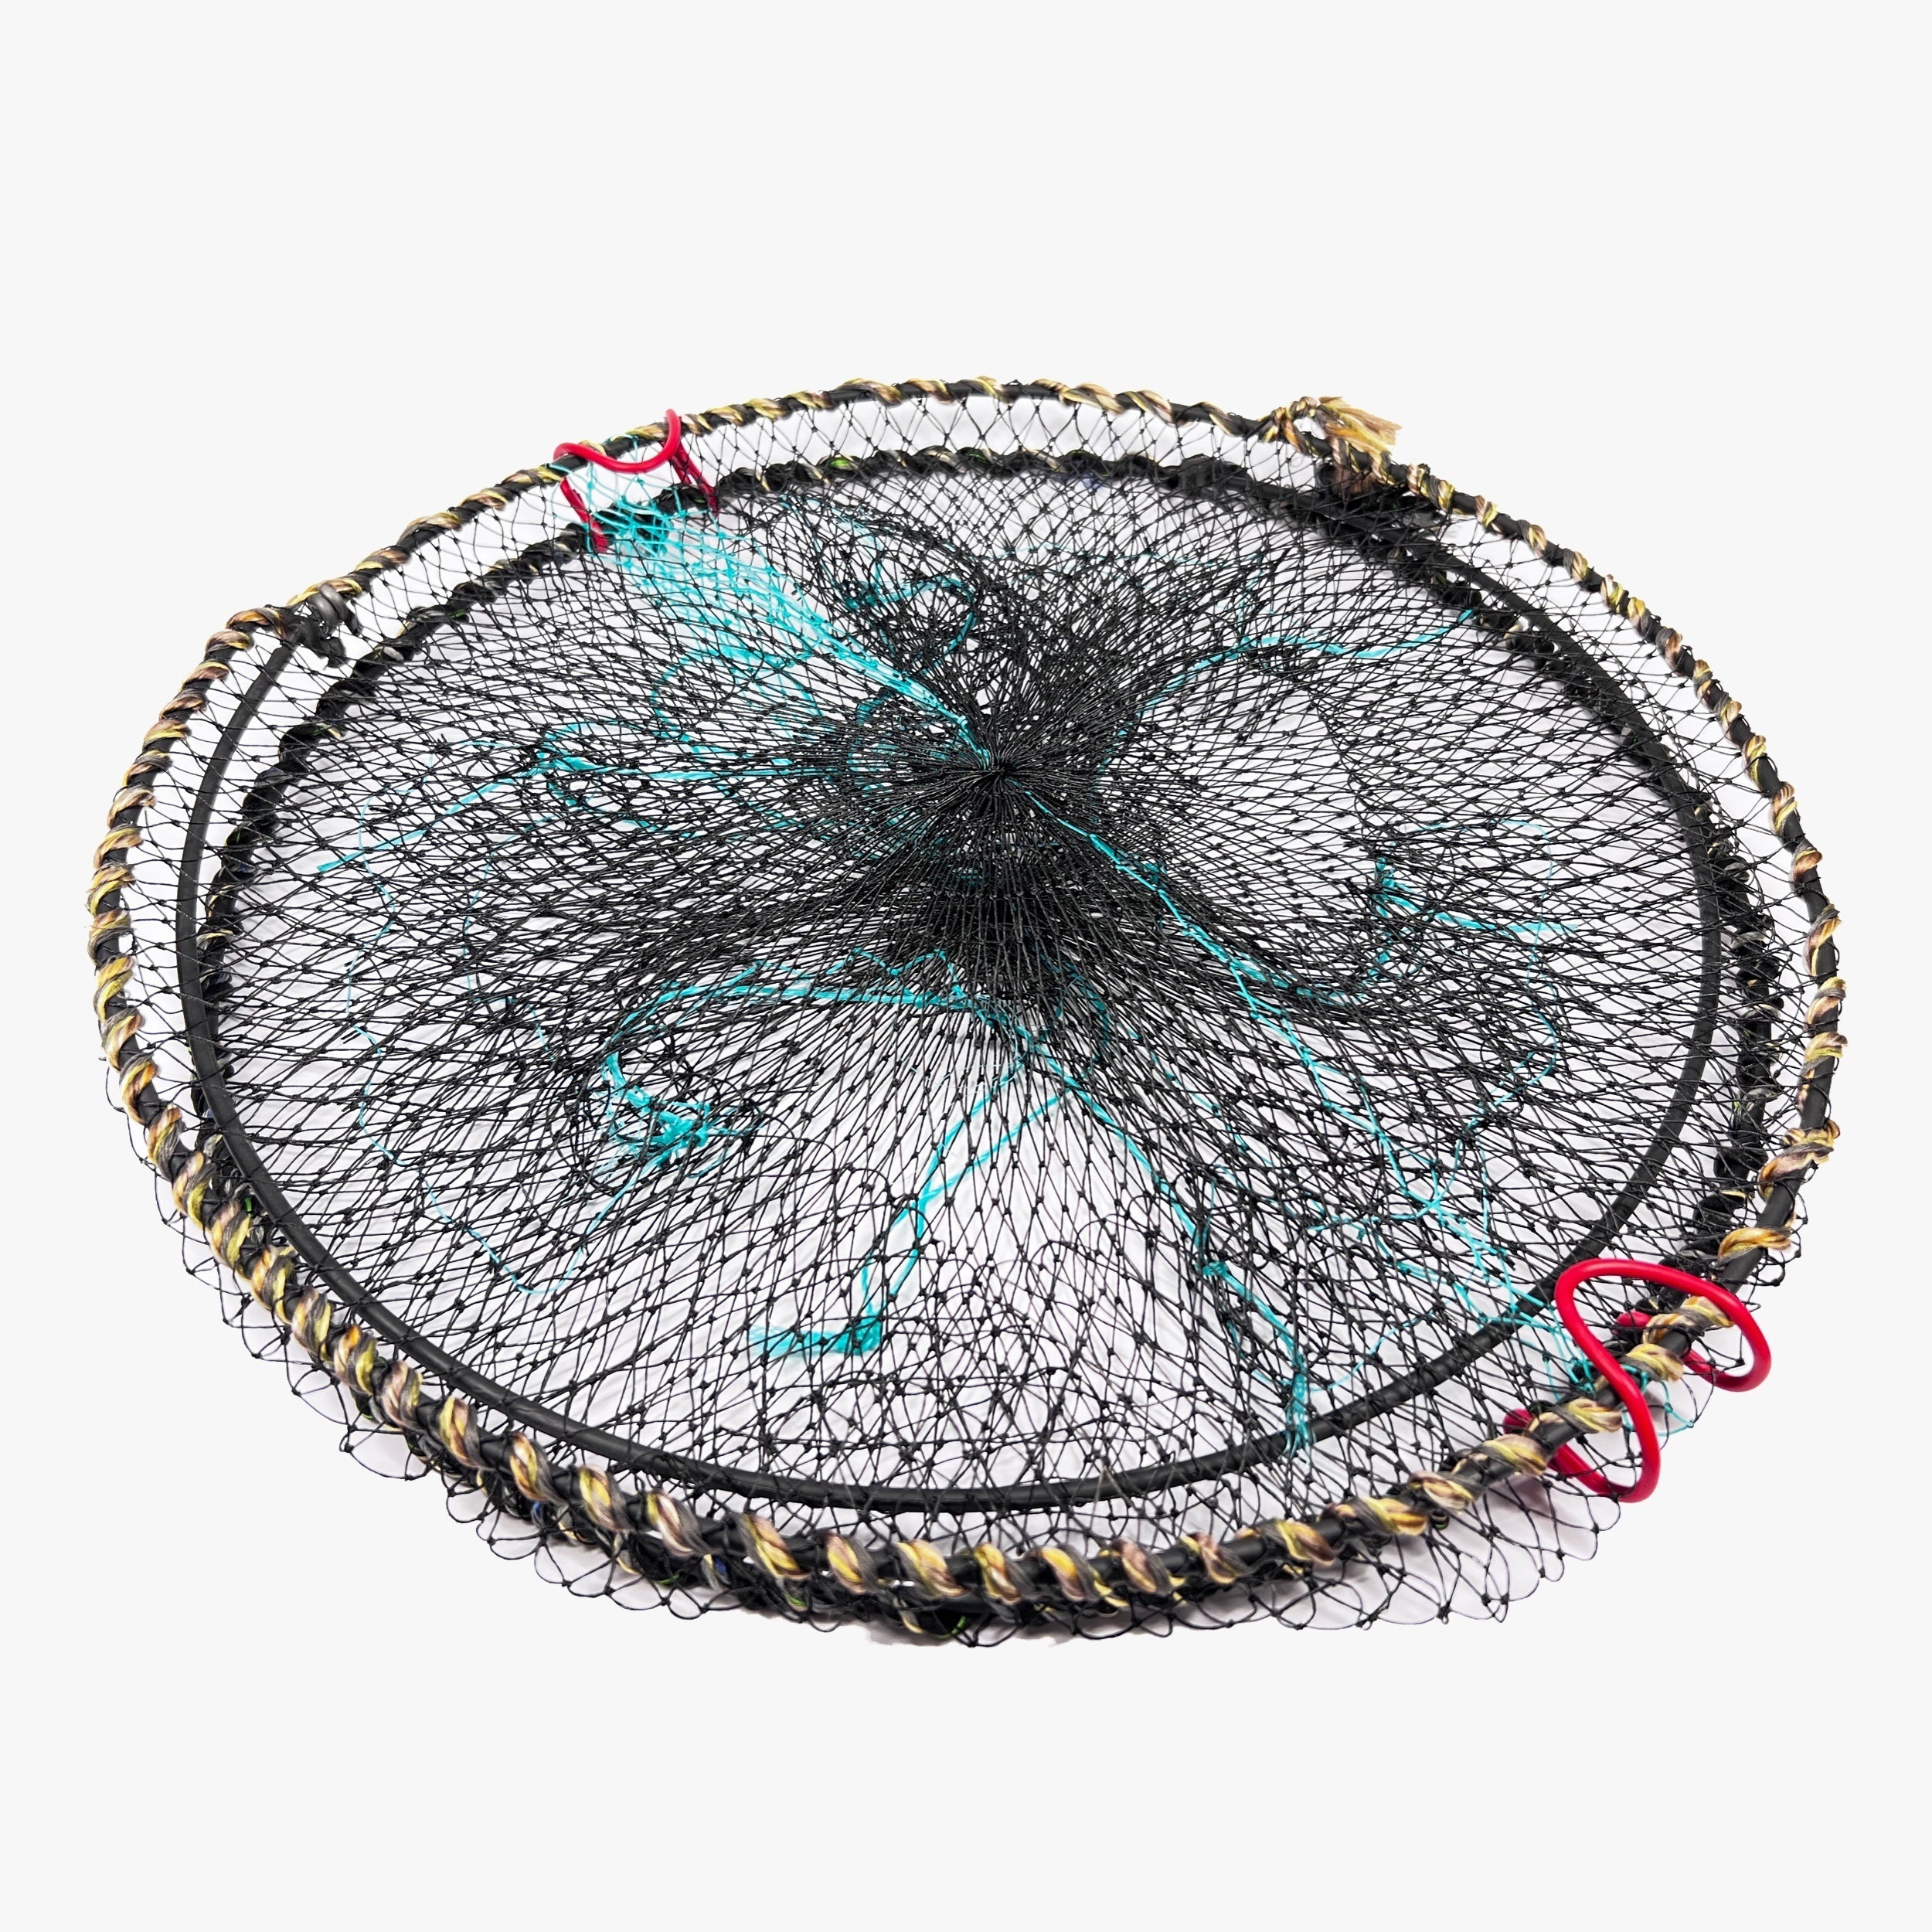  Anneome Yellow EEL and Shrimp Cage Practical The Cast Nets for  Fishing Freshwater Rugables Crayfish Catcher EEL Basket Inverted Beard Crab  Hand Frame Fishing Net Bait Pp : Sports 